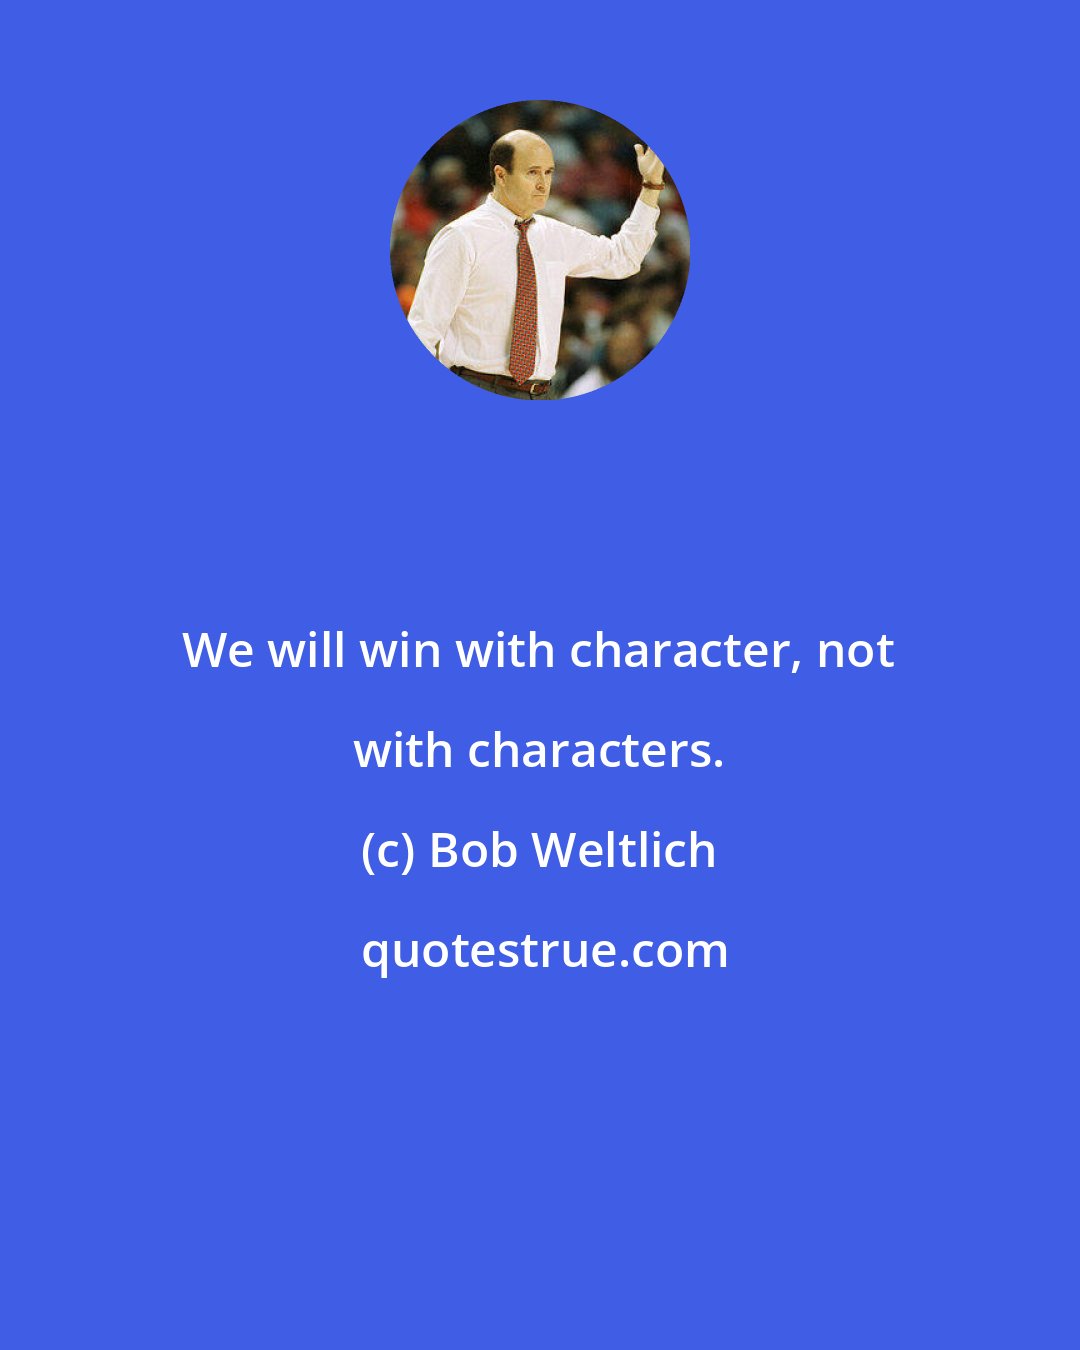 Bob Weltlich: We will win with character, not with characters.